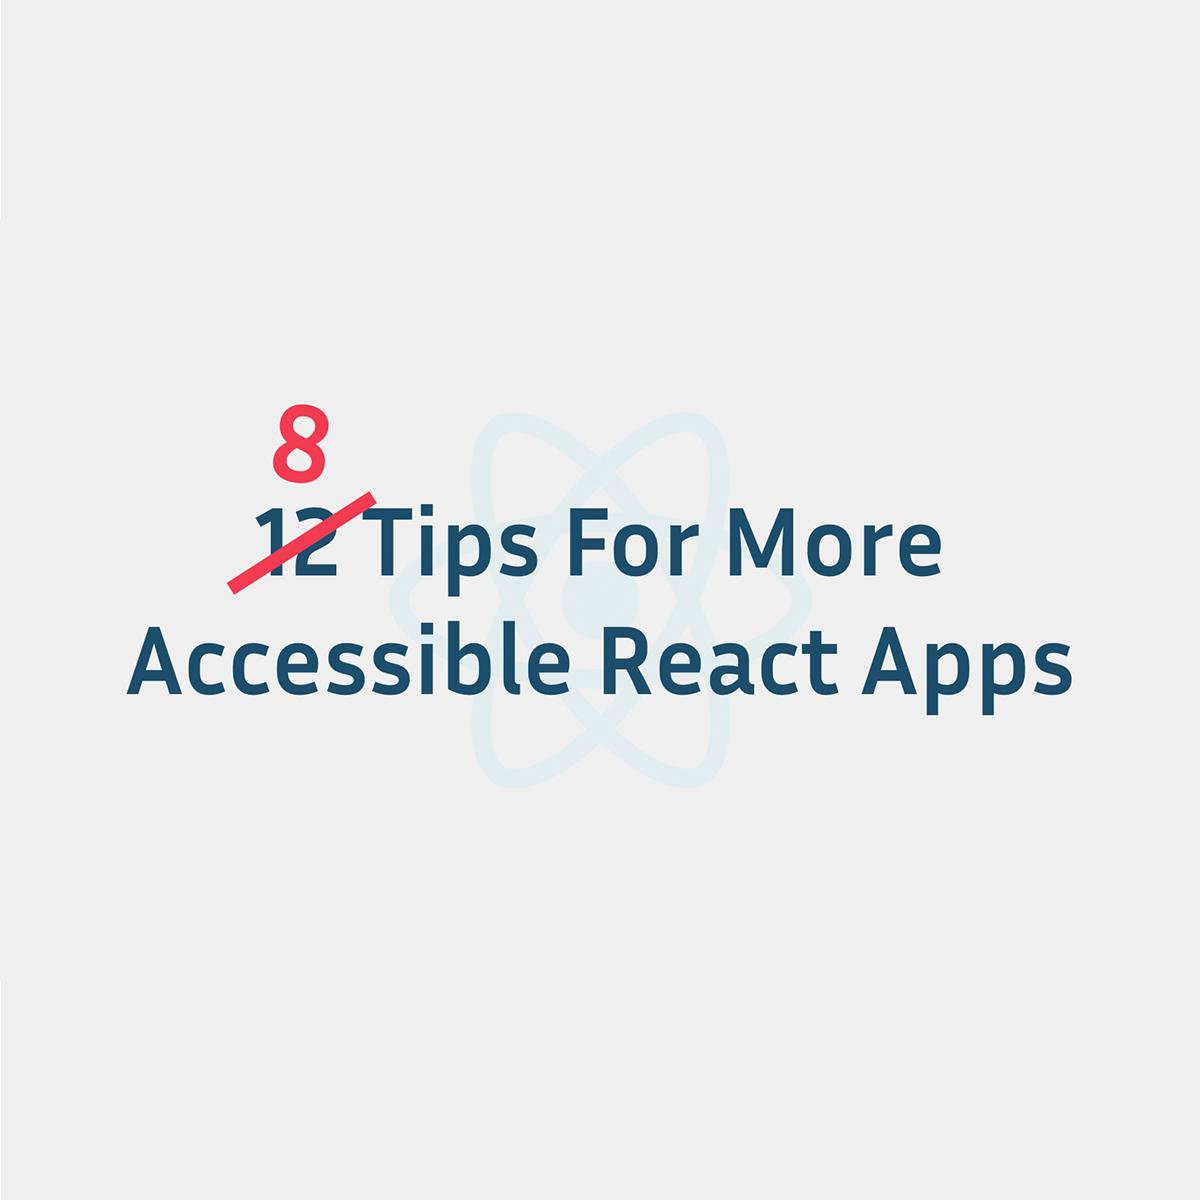 8 Tips for More Accessible React Apps